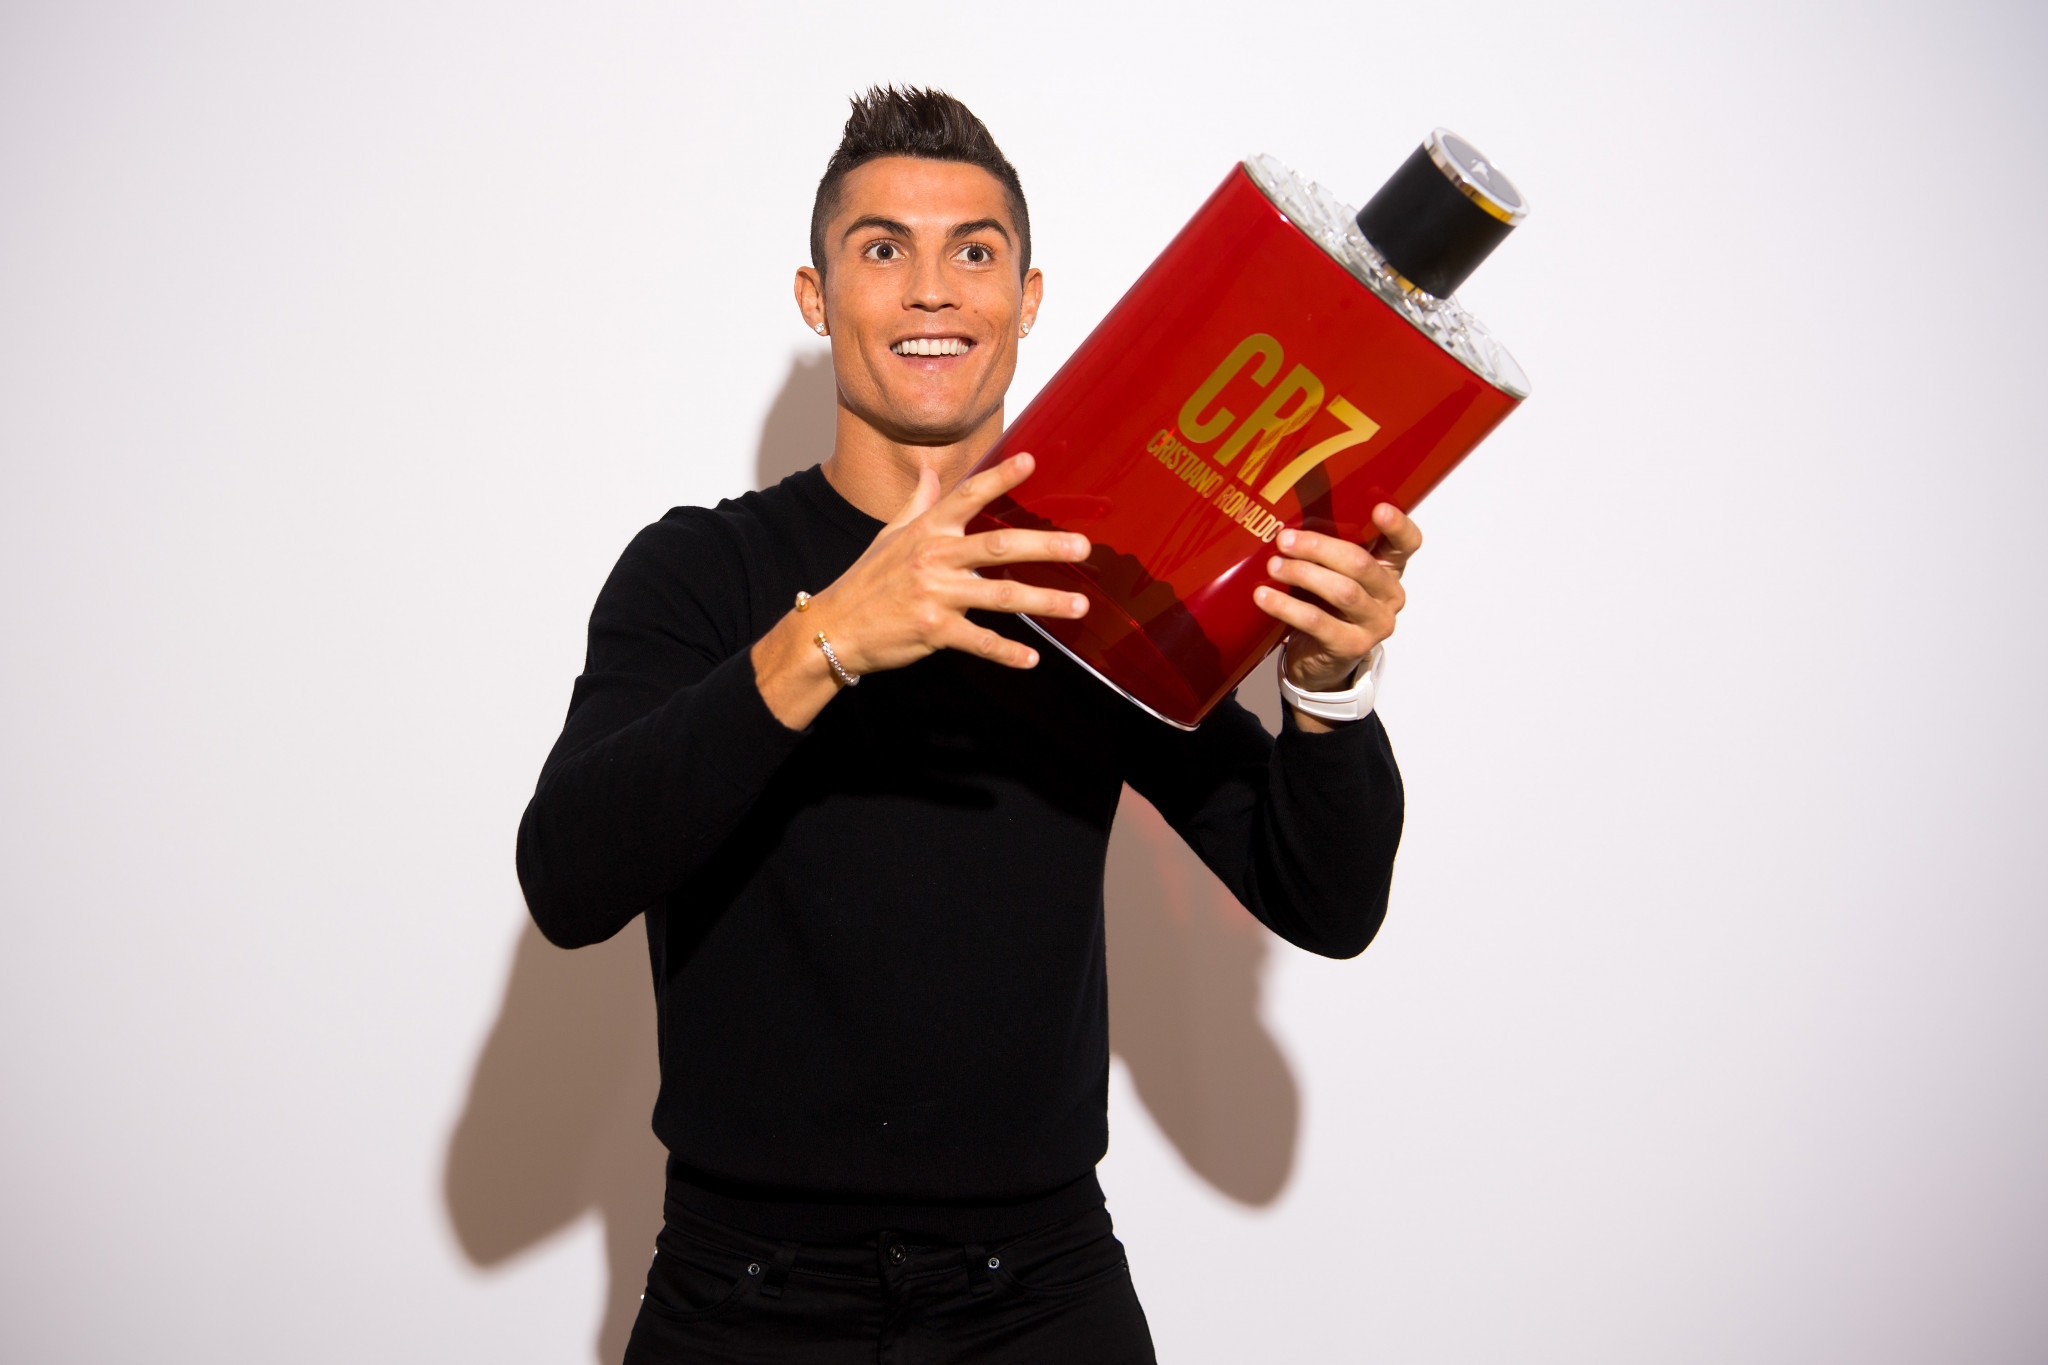 Football star Cristiano Ronaldo has many products with the registered CR7 logo ©Getty Images